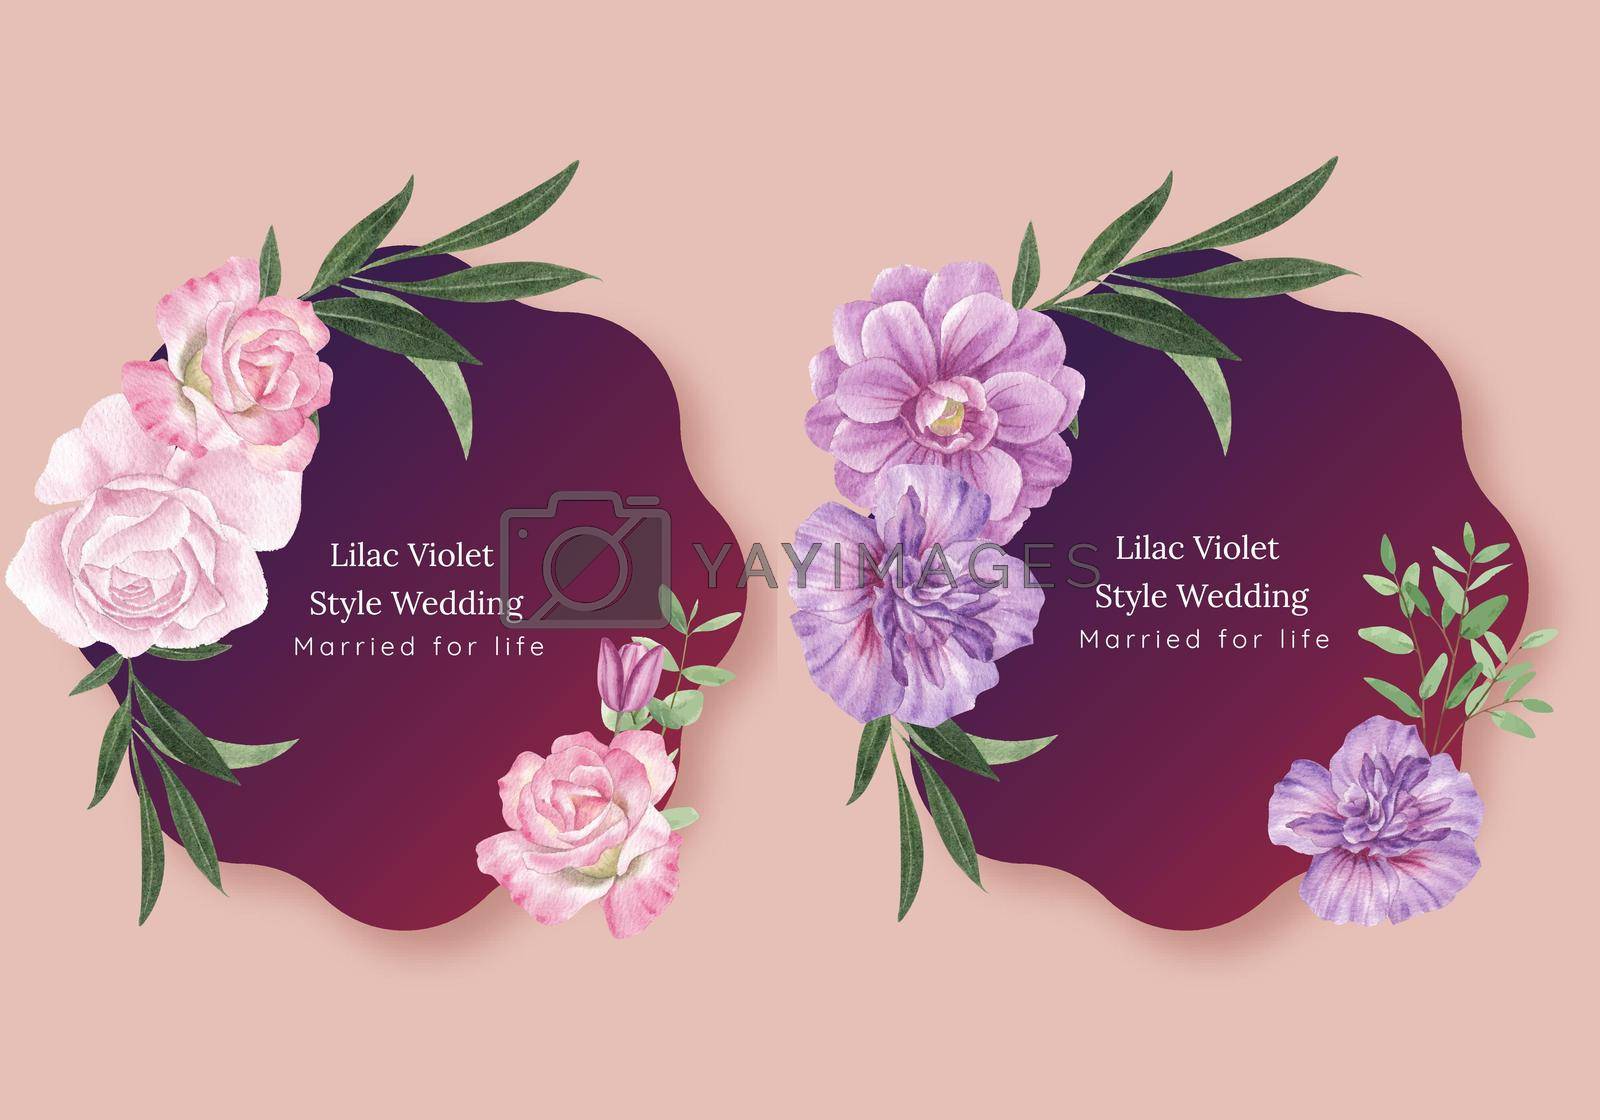 Royalty free image of Wreath template with lilac violet wedding concept,watercolor style by Photographeeasia